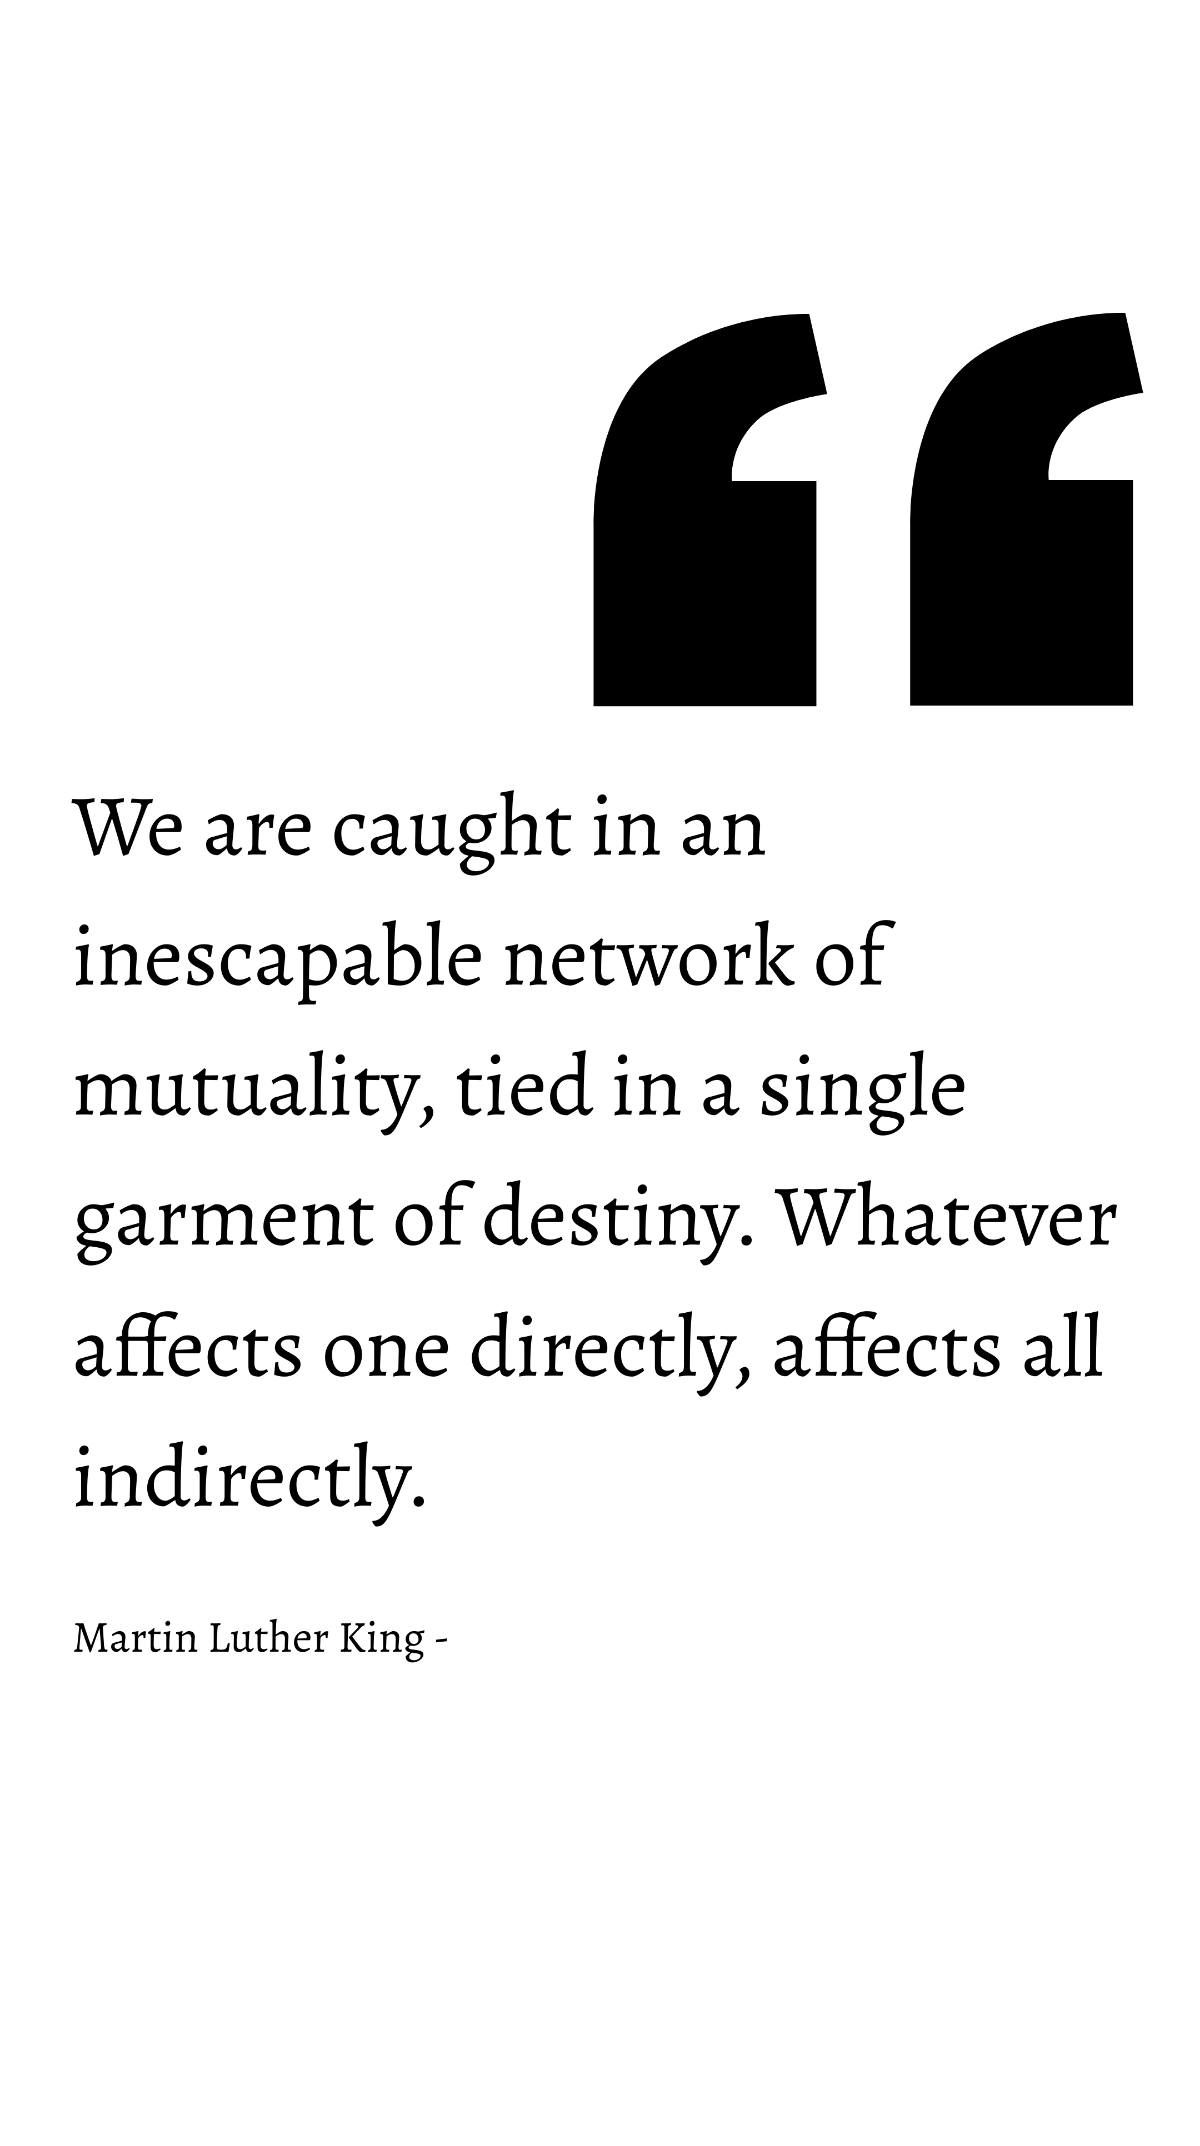 Free Martin Luther King - We are caught in an inescapable network of mutuality, tied in a single garment of destiny. Whatever affects one directly, affects all indirectly. Template